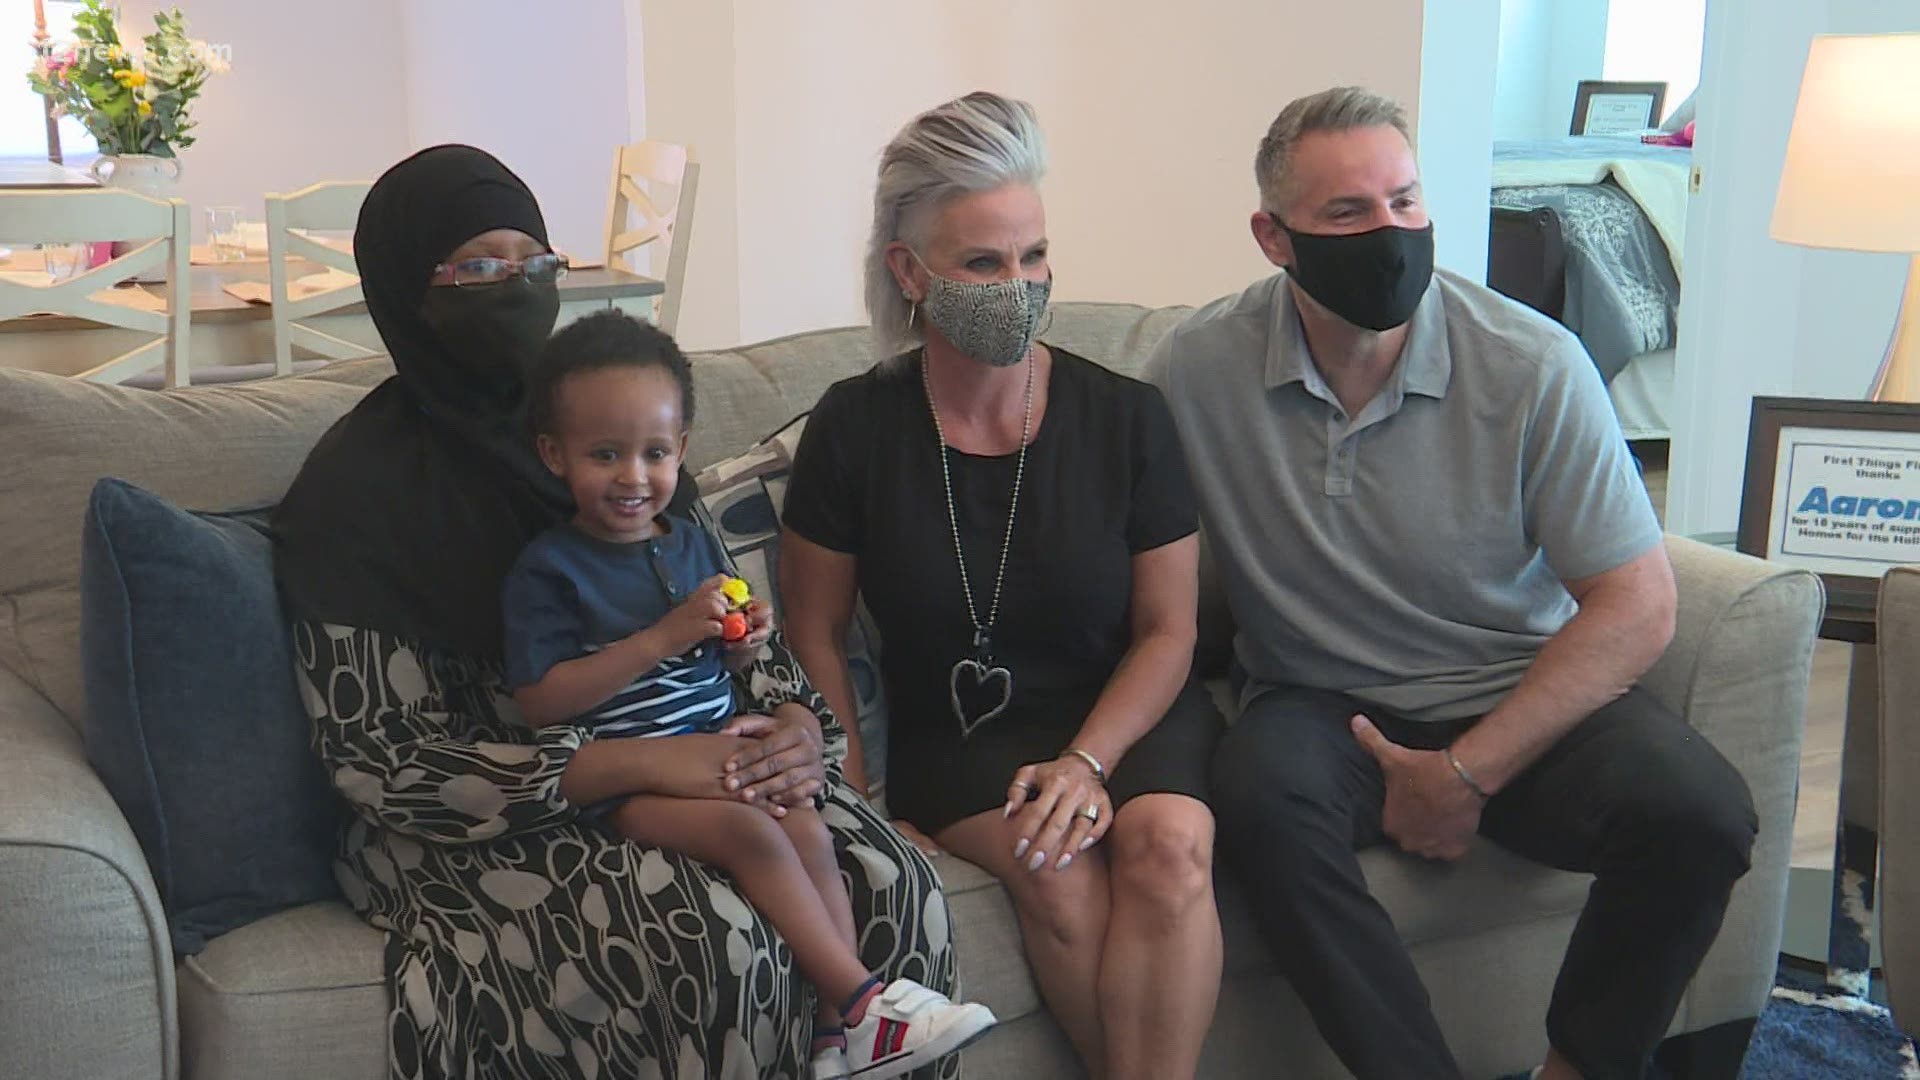 A single mother is now a first-time homeowner. She was treated to an early Mother's Day surprise by Kurt and Brenda Warner!